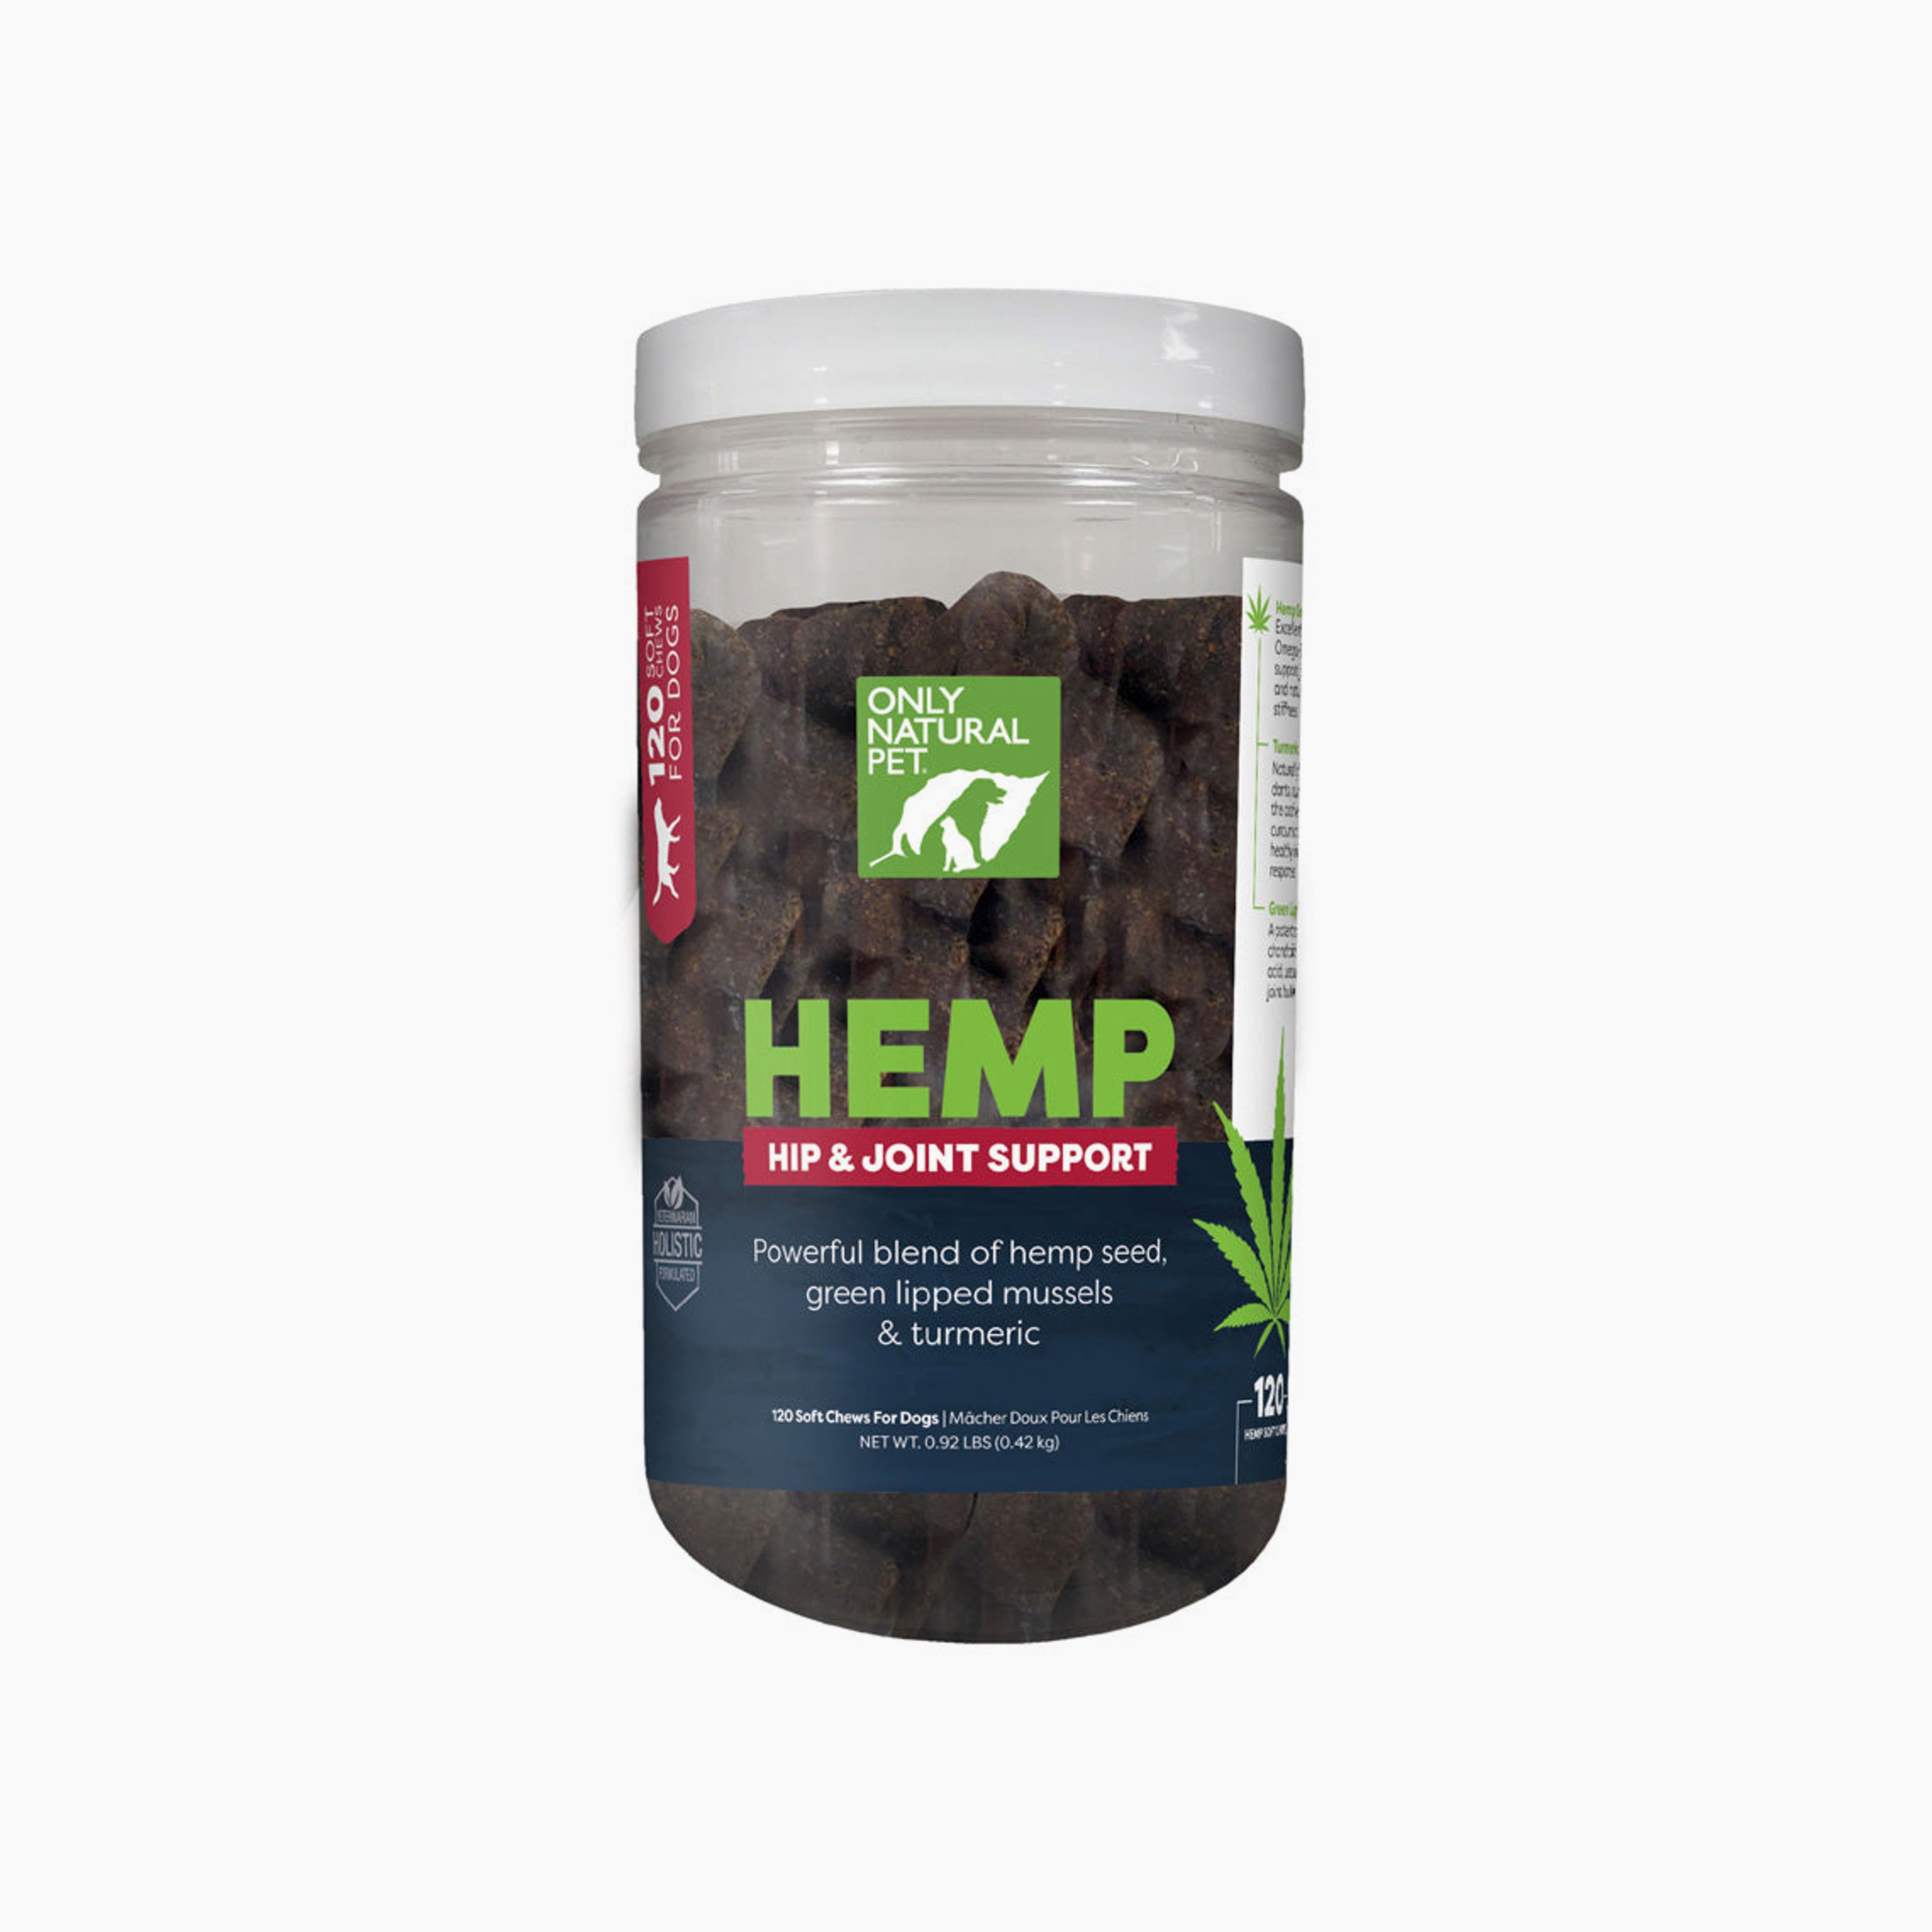 Only Natural Pet Hip & Joint Support Hemp Soft Chew for Dogs